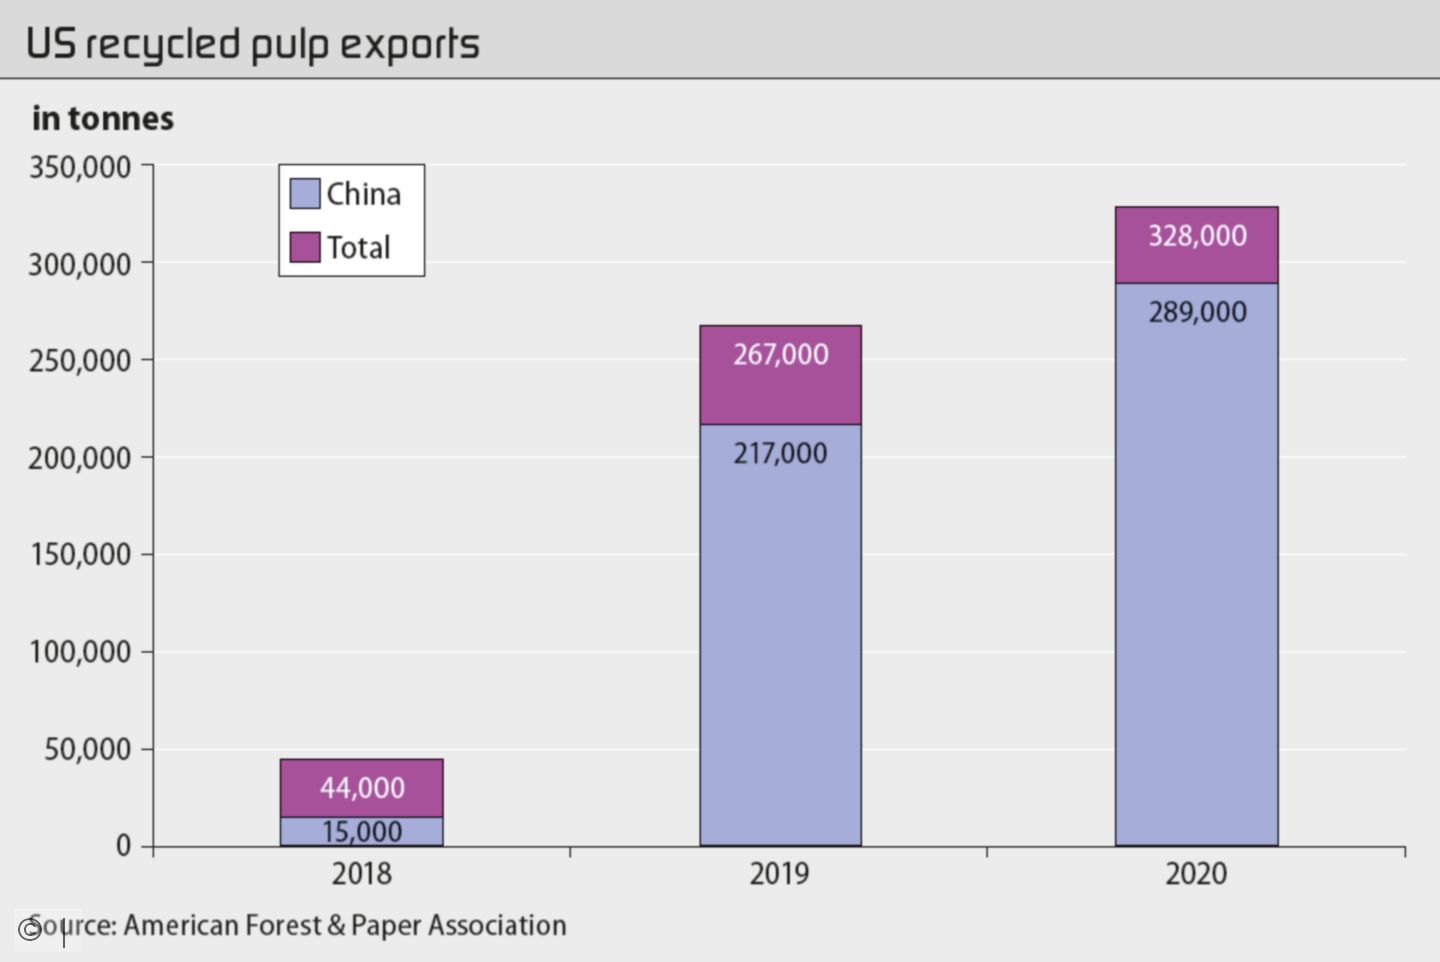 US recycled pulp exports rise significantly